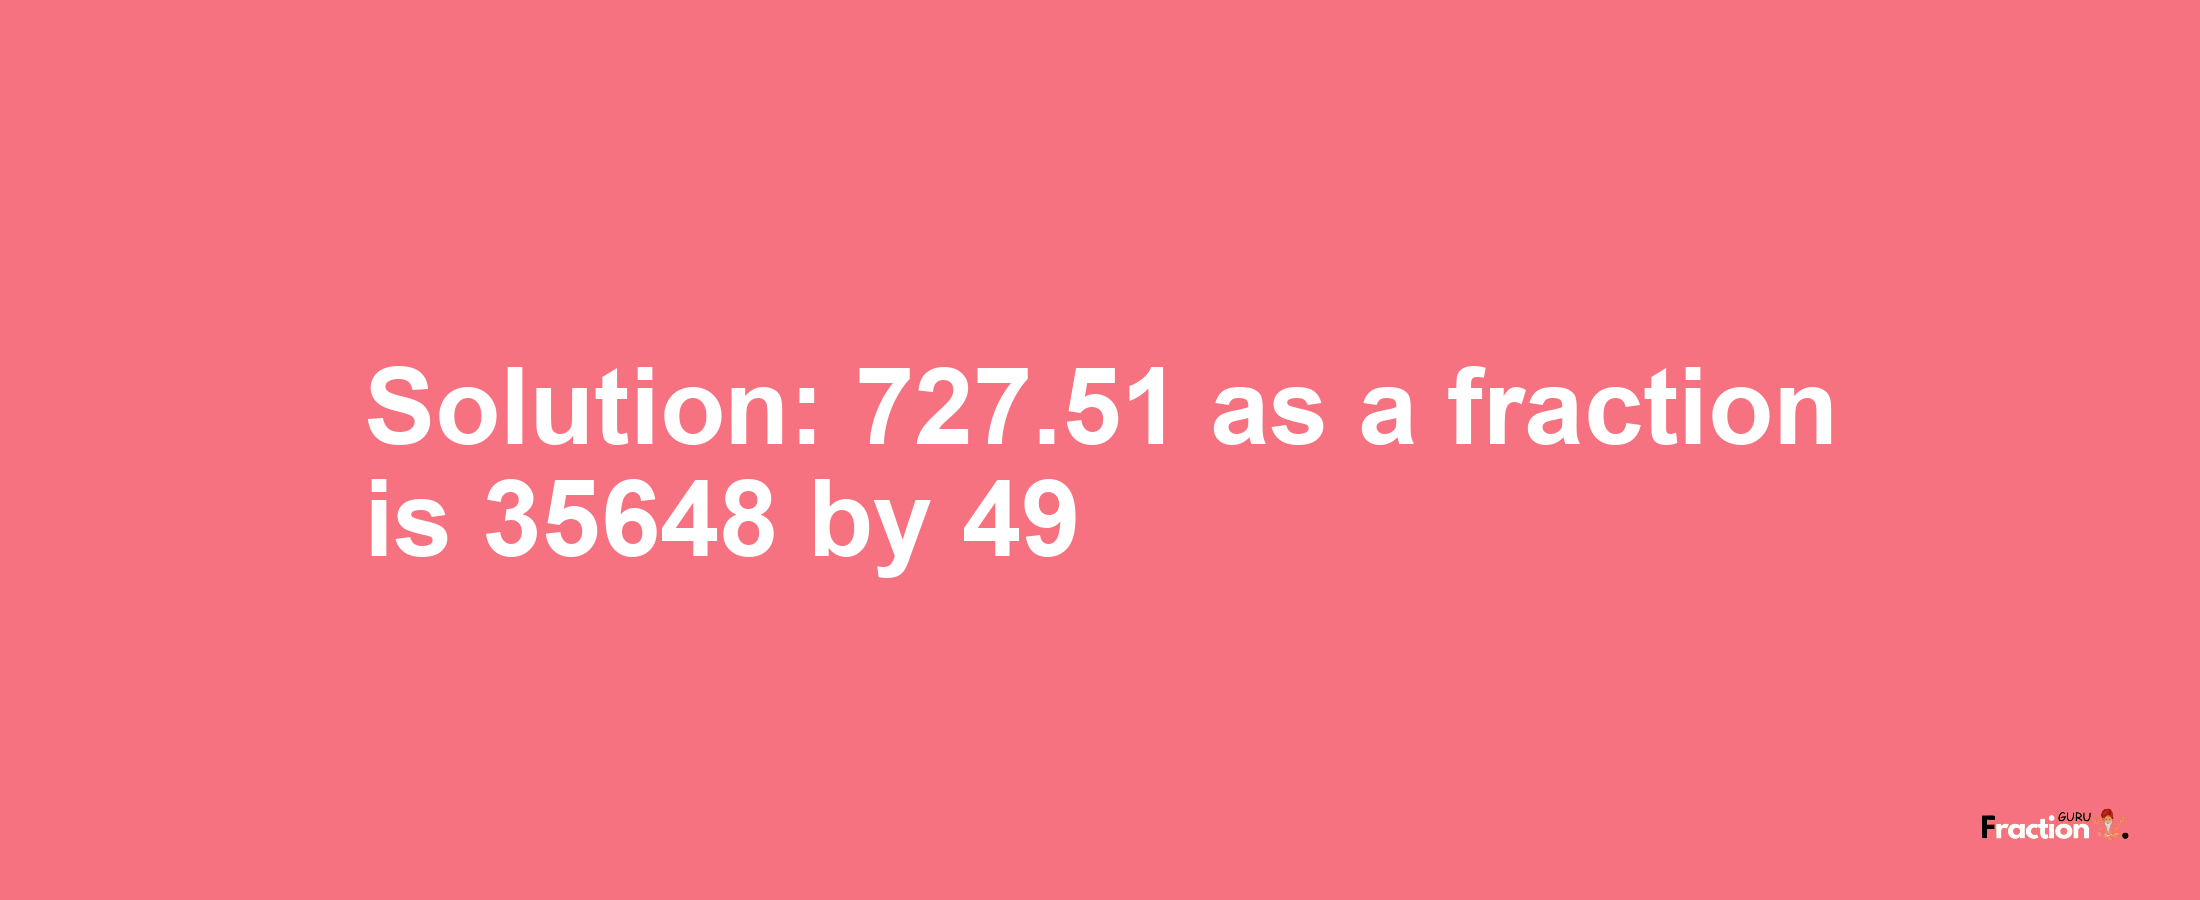 Solution:727.51 as a fraction is 35648/49